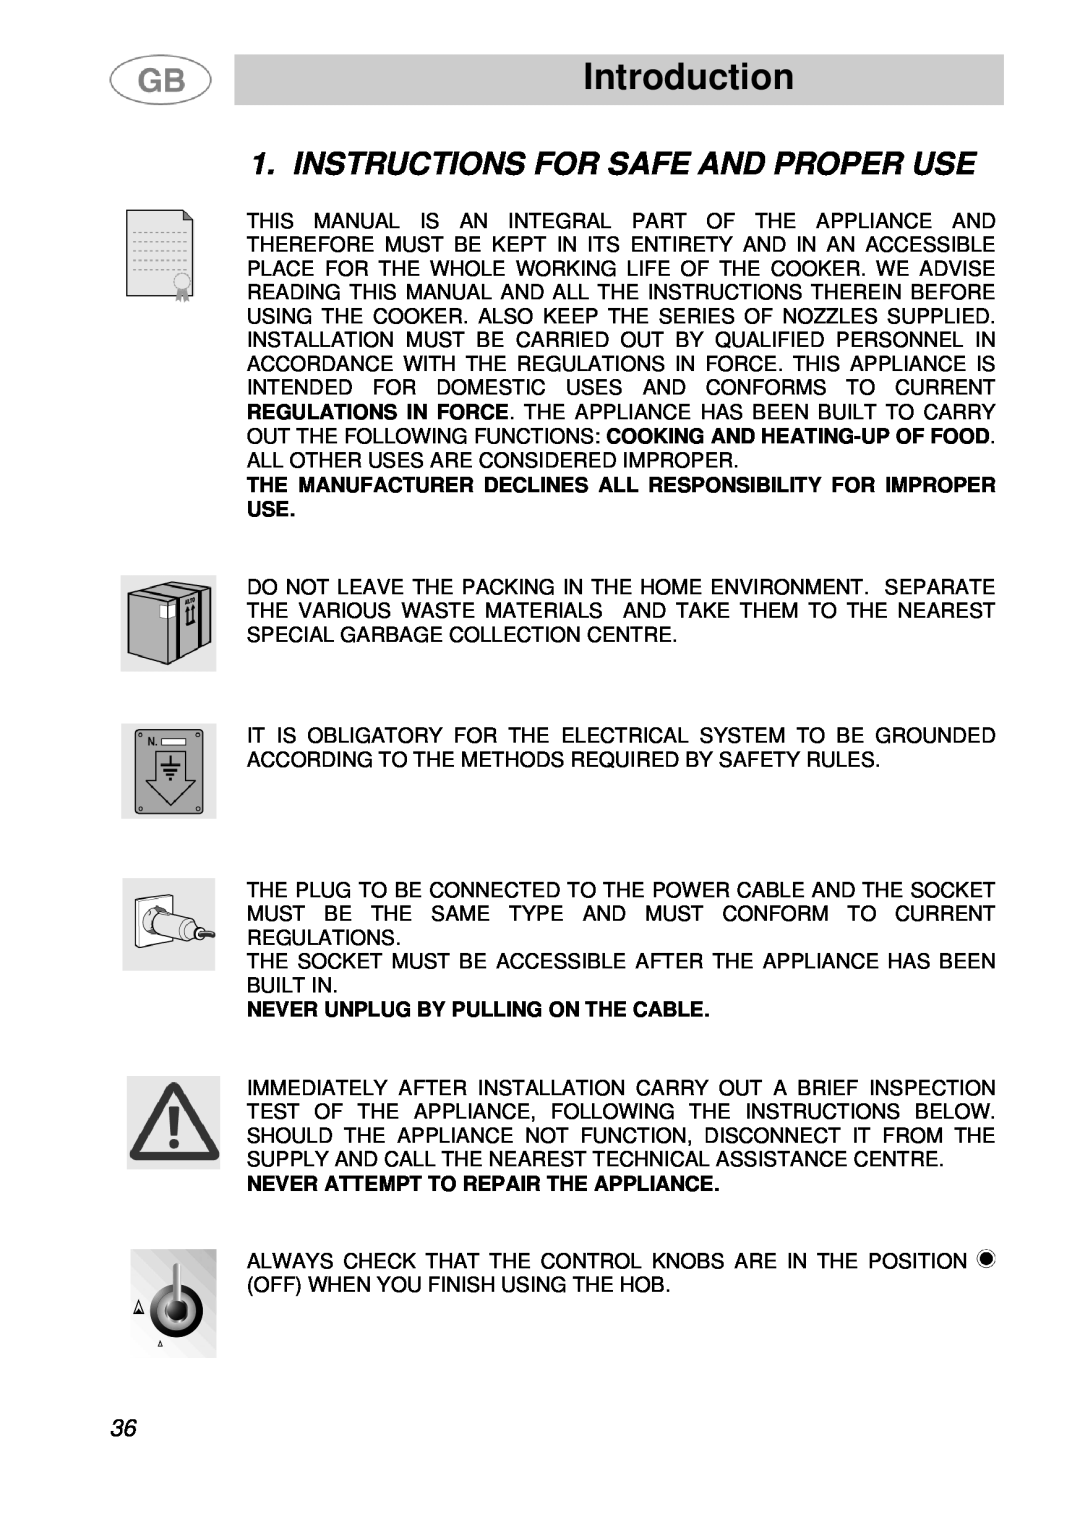 Smeg A41A manual Introduction, Instructions For Safe And Proper Use, Never Unplug By Pulling On The Cable 